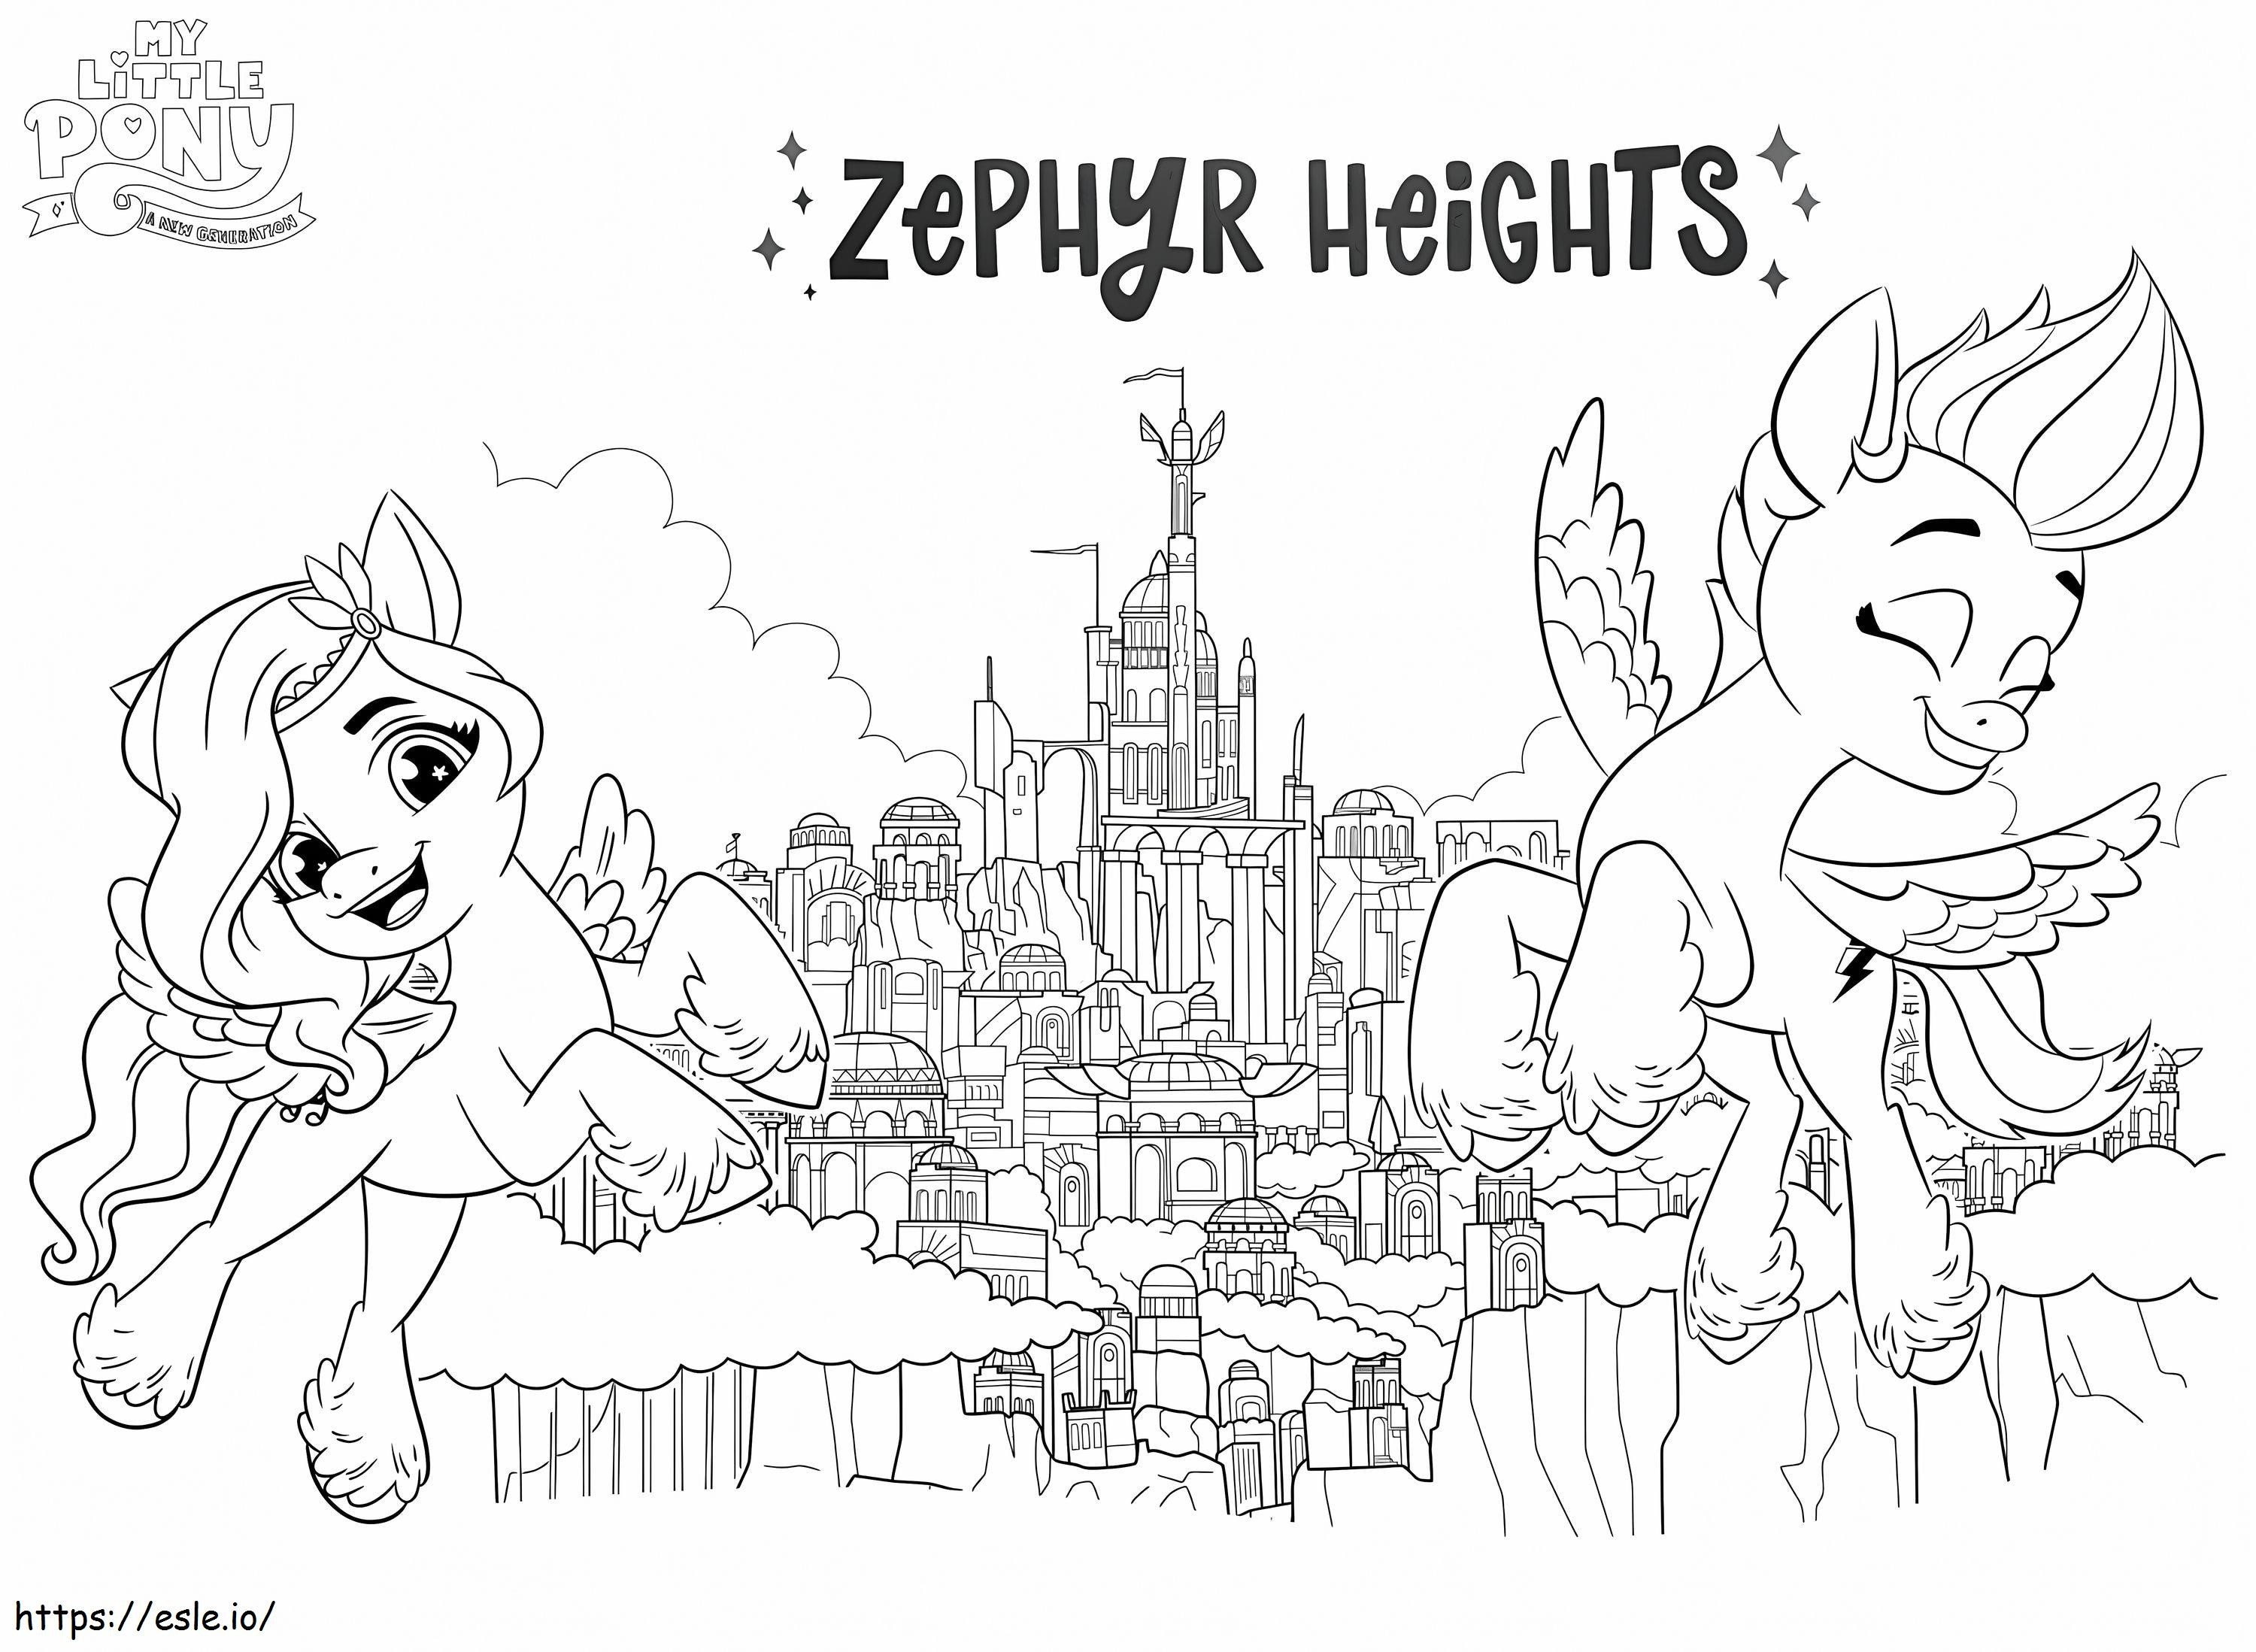 Zephyr Heights coloring page